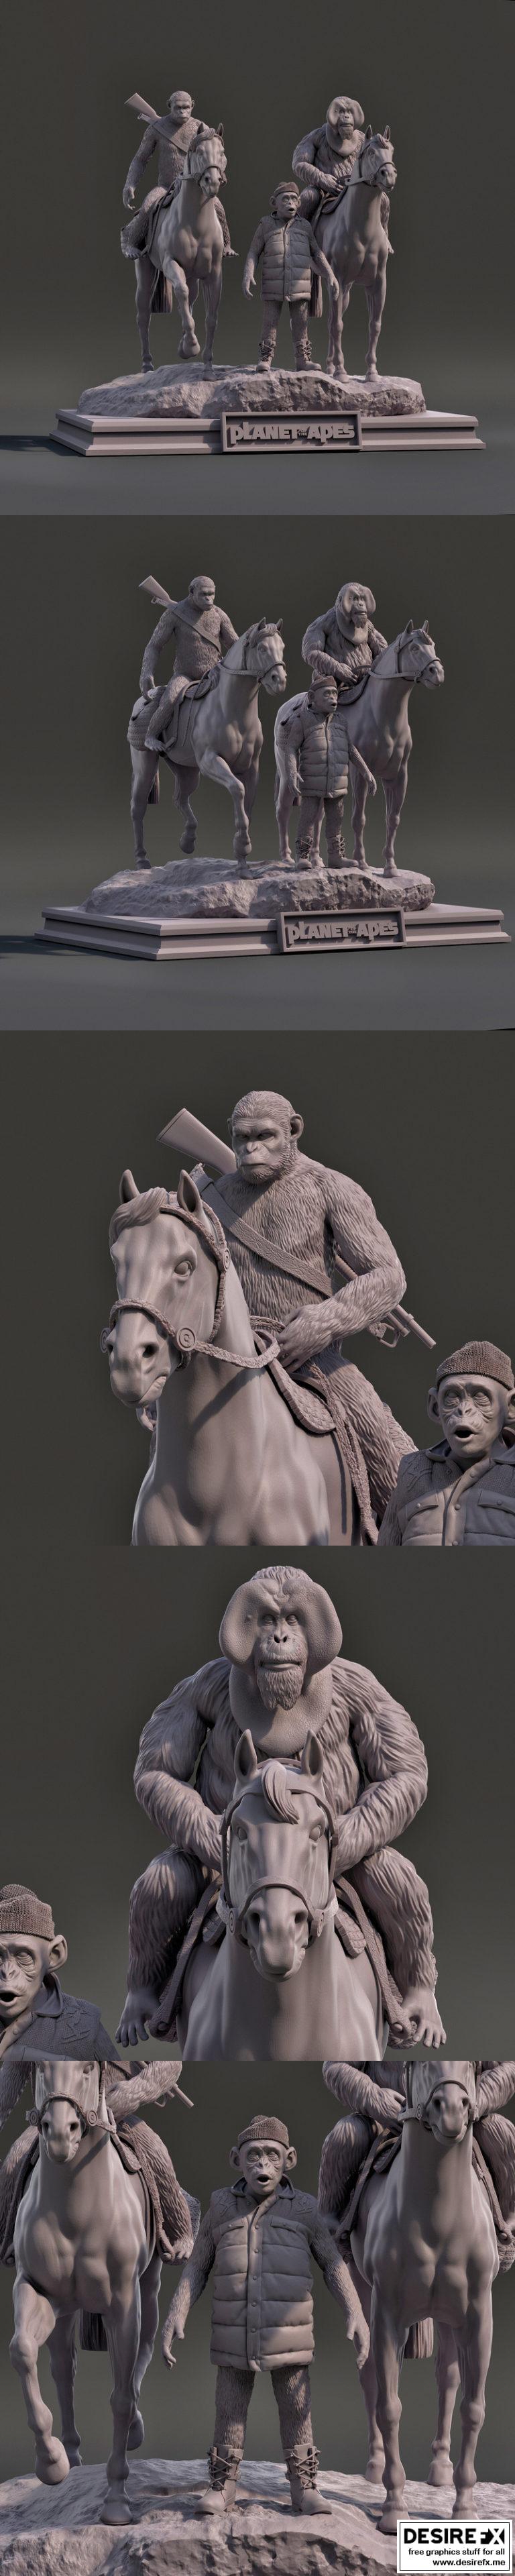 Desire FX 3d models | Planet of the Apes